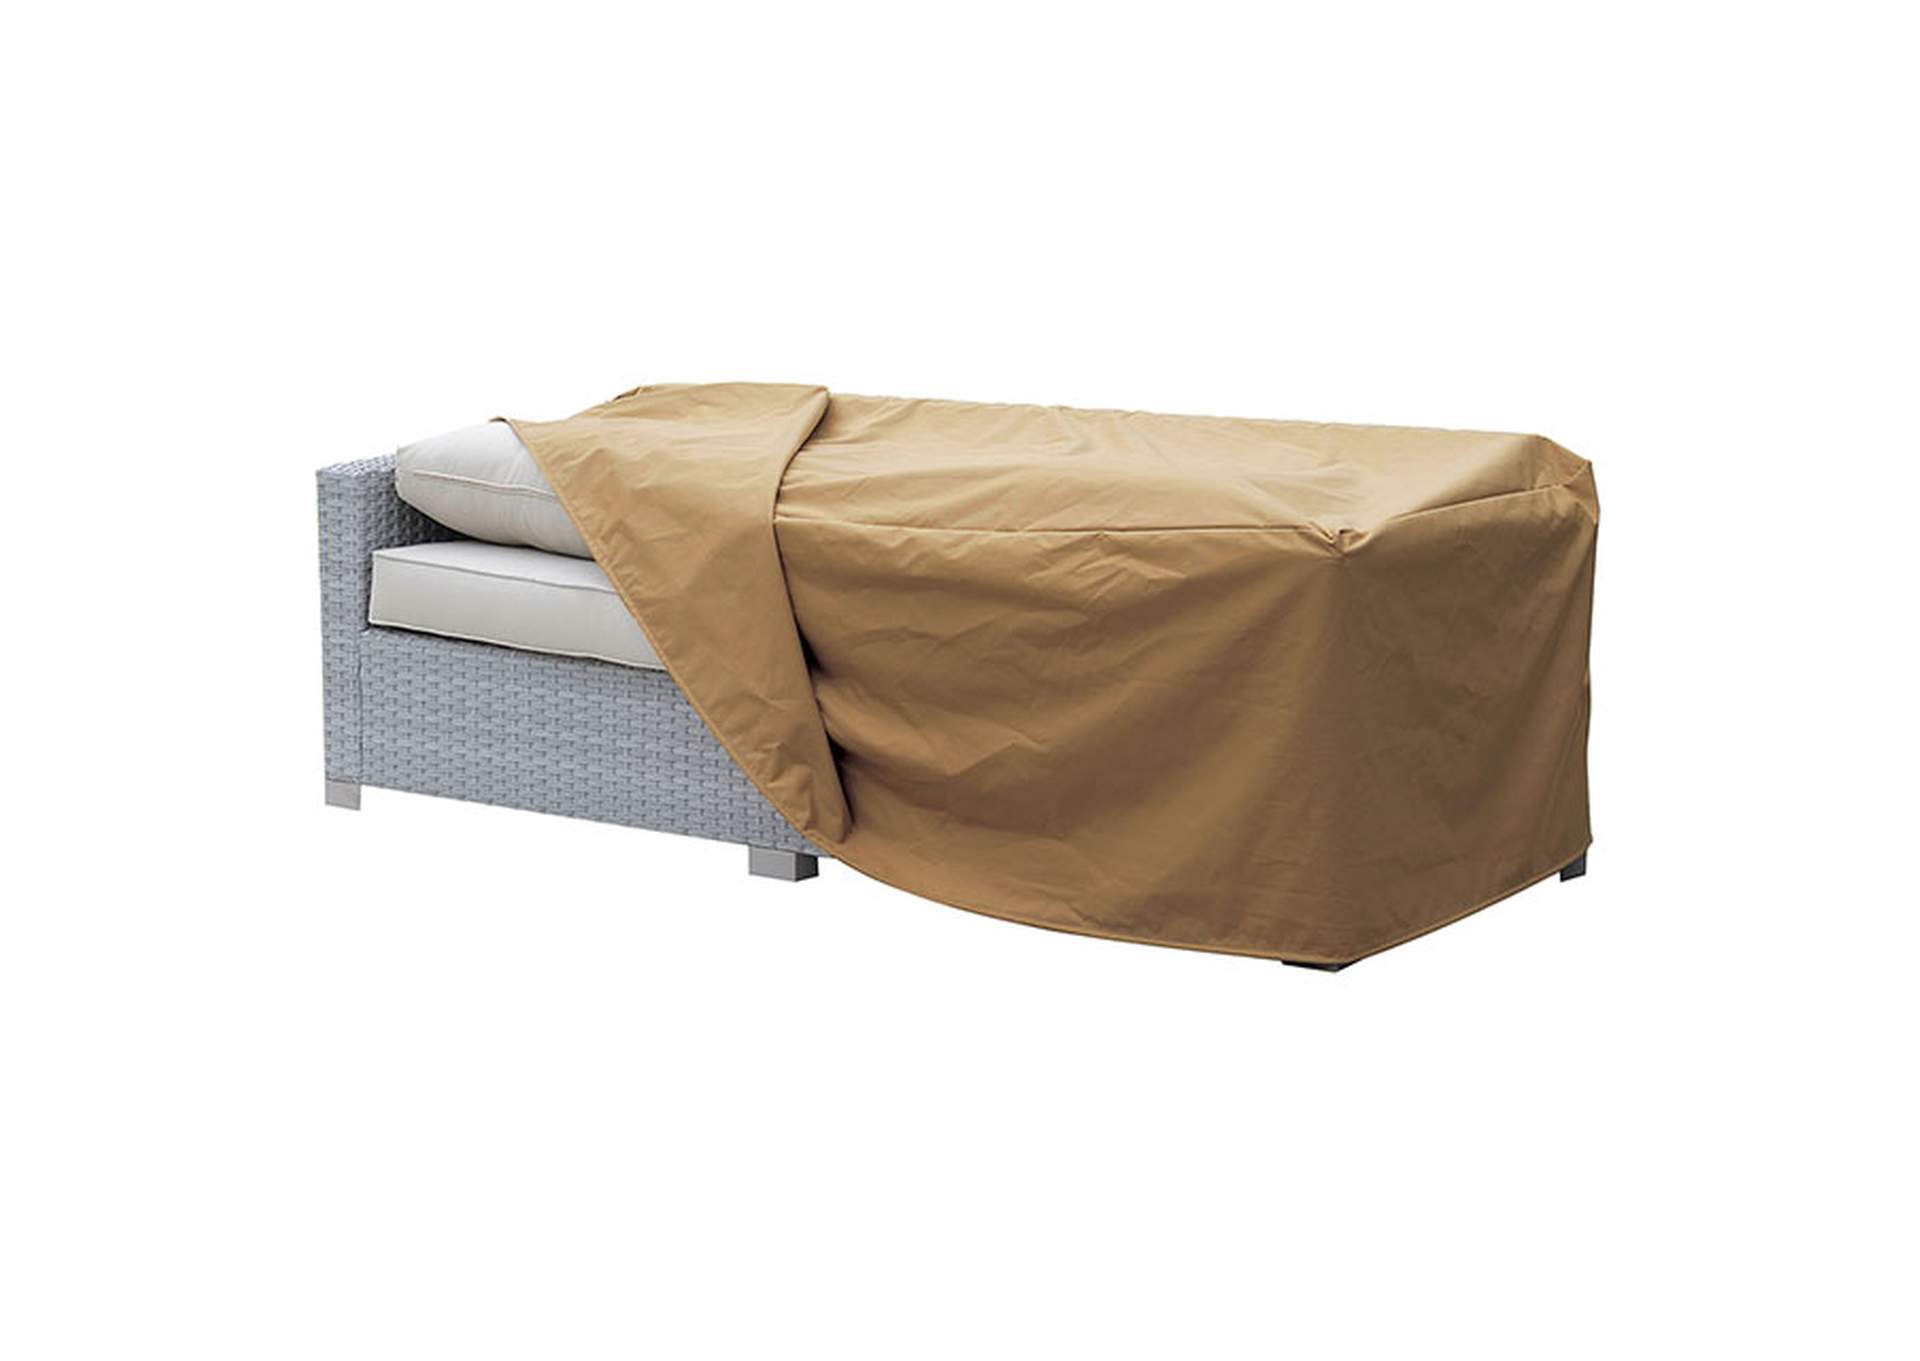 Boyle Light Brown Dust Cover For Sofa - Small,Furniture of America